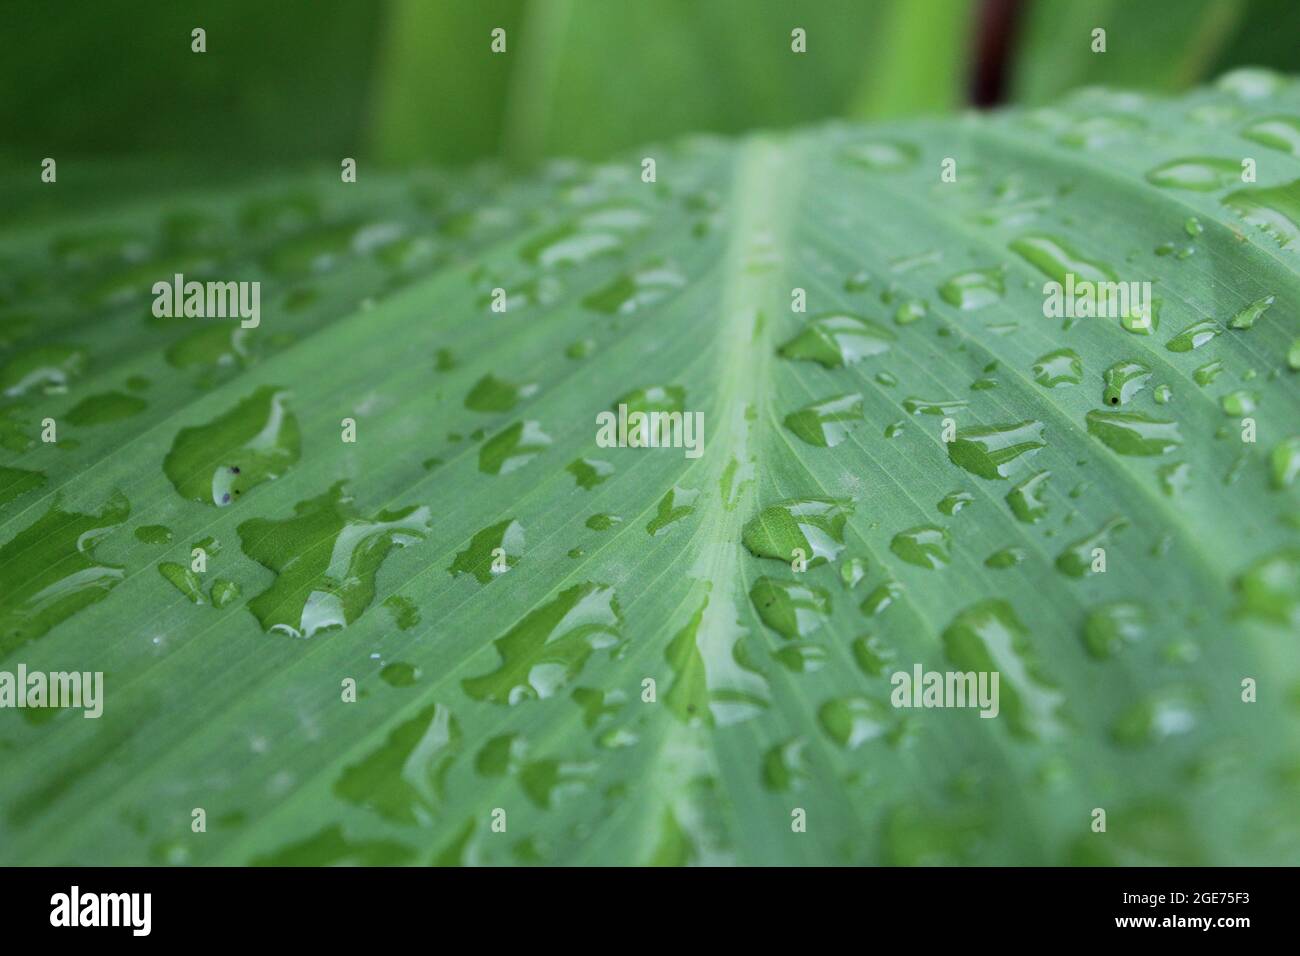 A leaf with waterdrops. Stock Photo